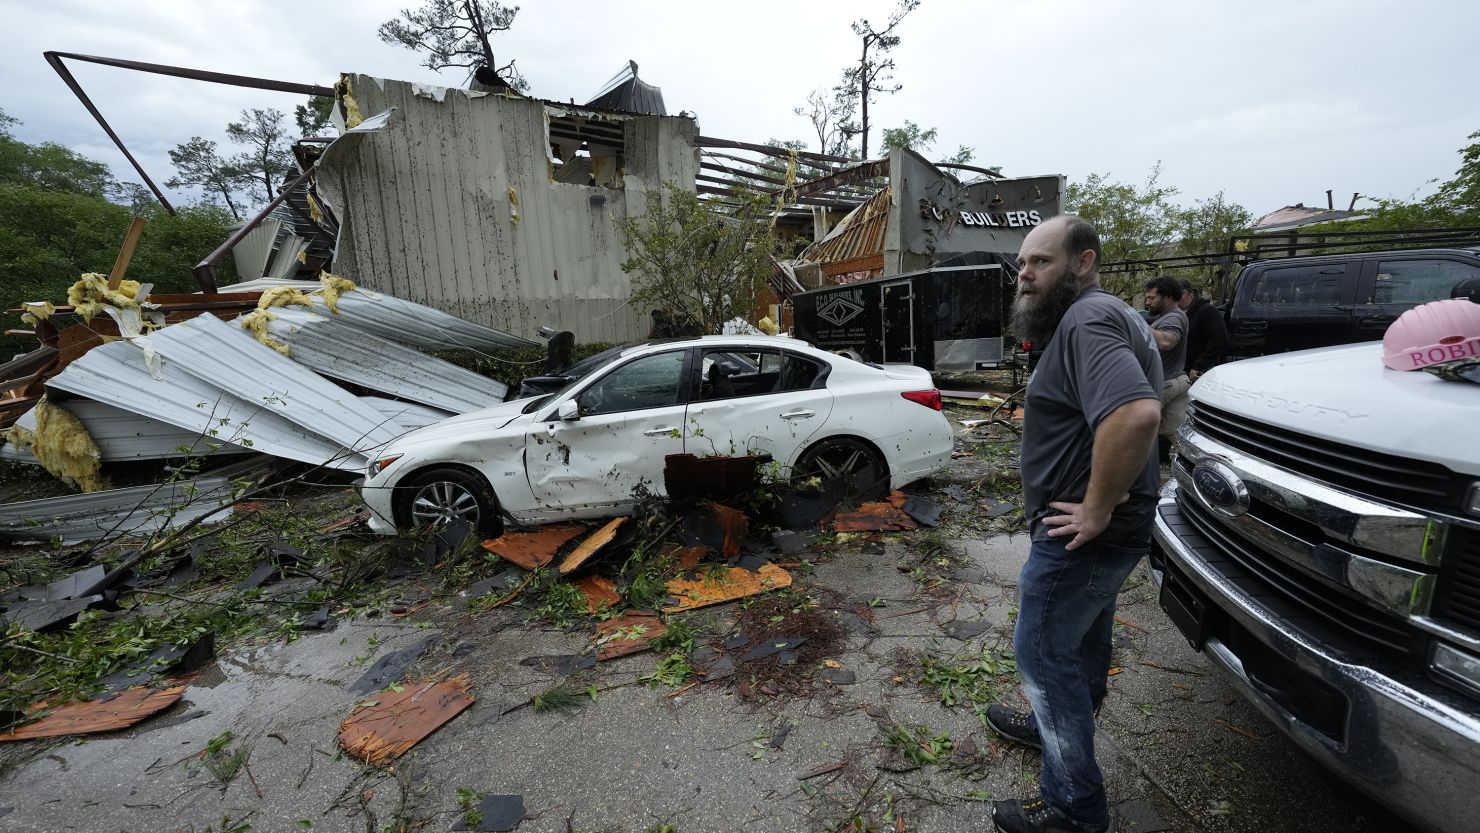 People survey a severely damaged business Slidell, Louisiana, after severe storms swept through on Wednesday.